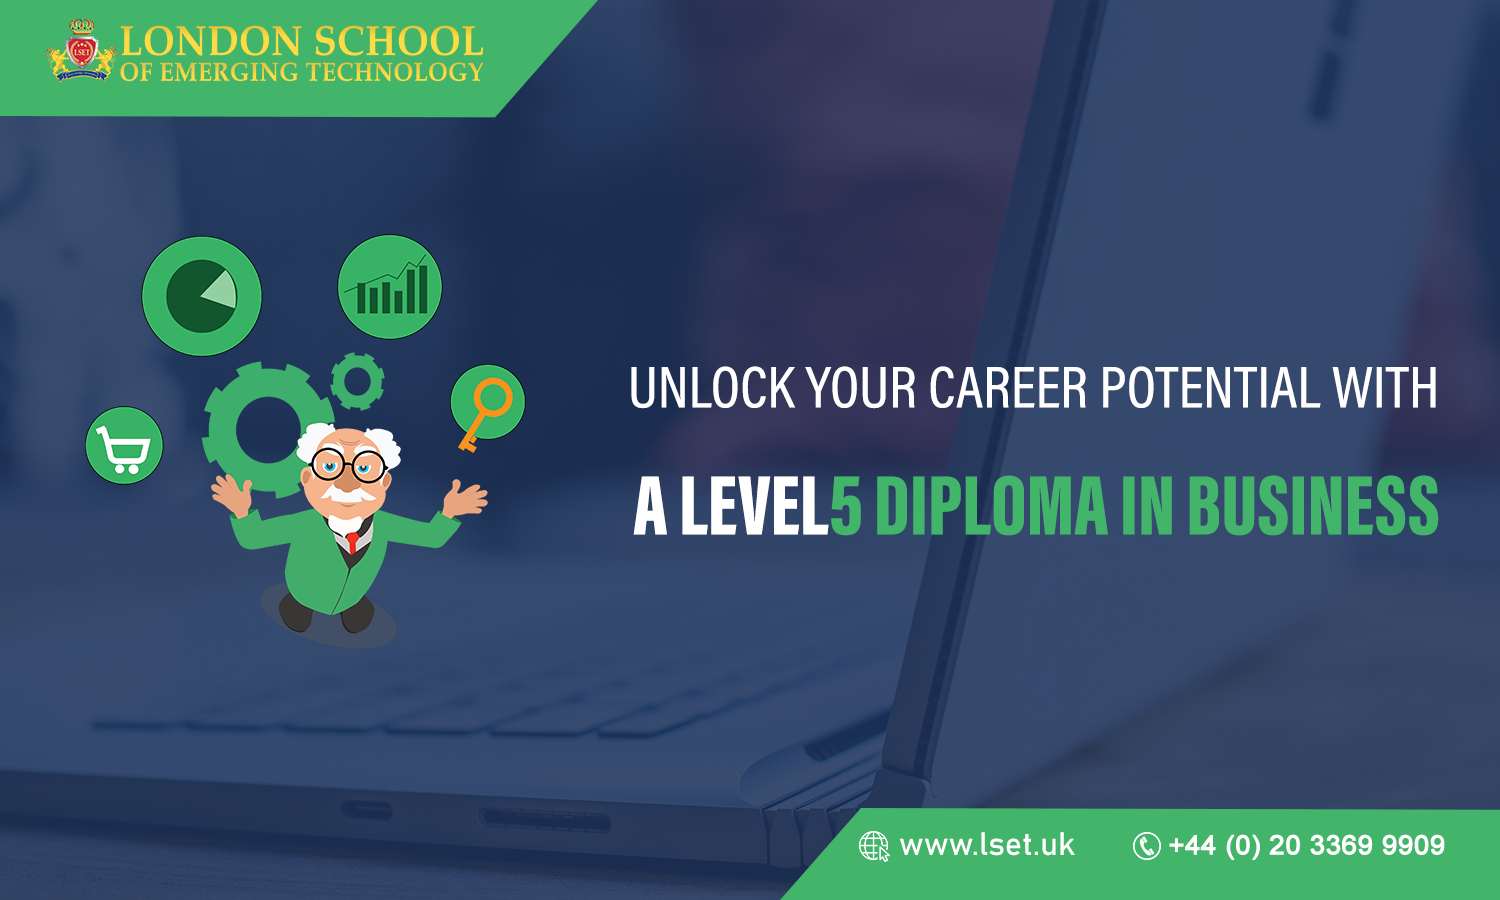 Unlock Your Career Potential with a Level 5 Diploma in Business